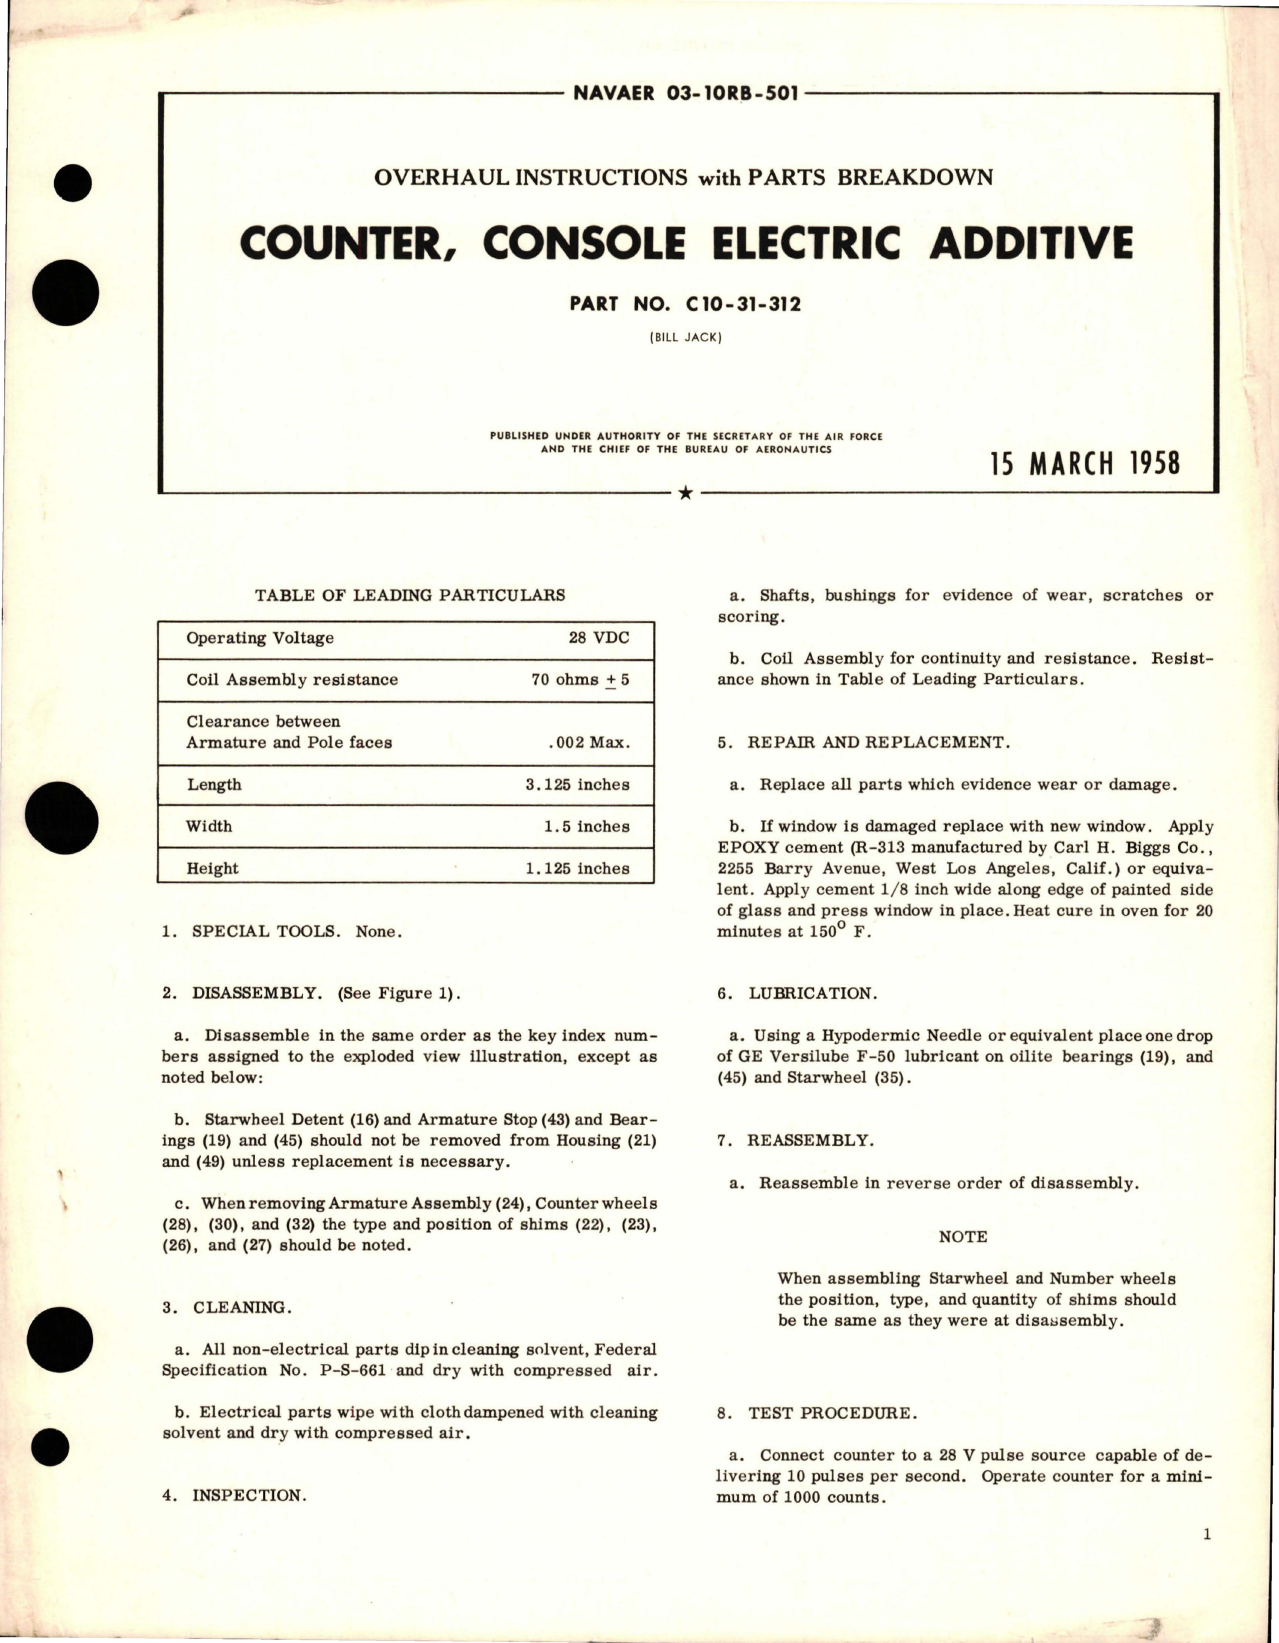 Sample page 1 from AirCorps Library document: Overhaul Instructions with Parts Breakdown for Console Electric Additive Counter - Part C10-31-312